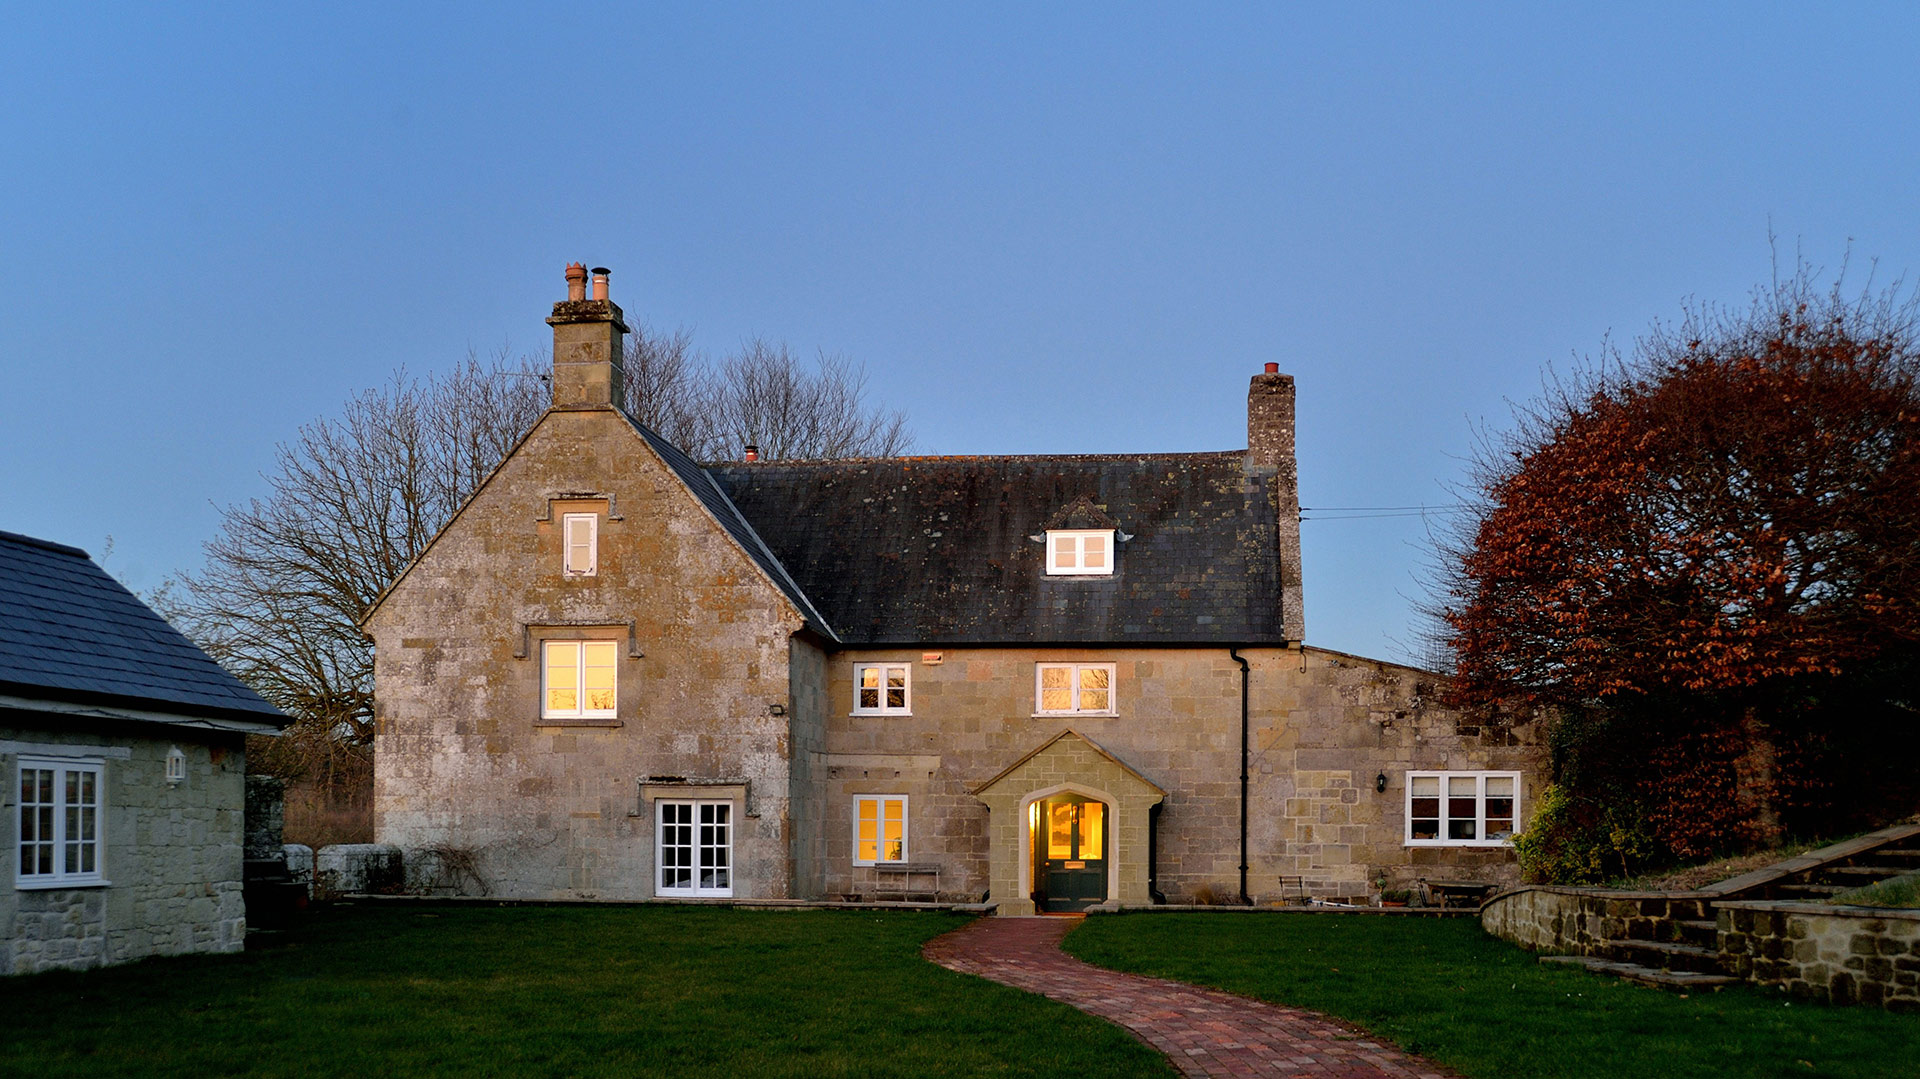 front view of traditional stone house at dusk